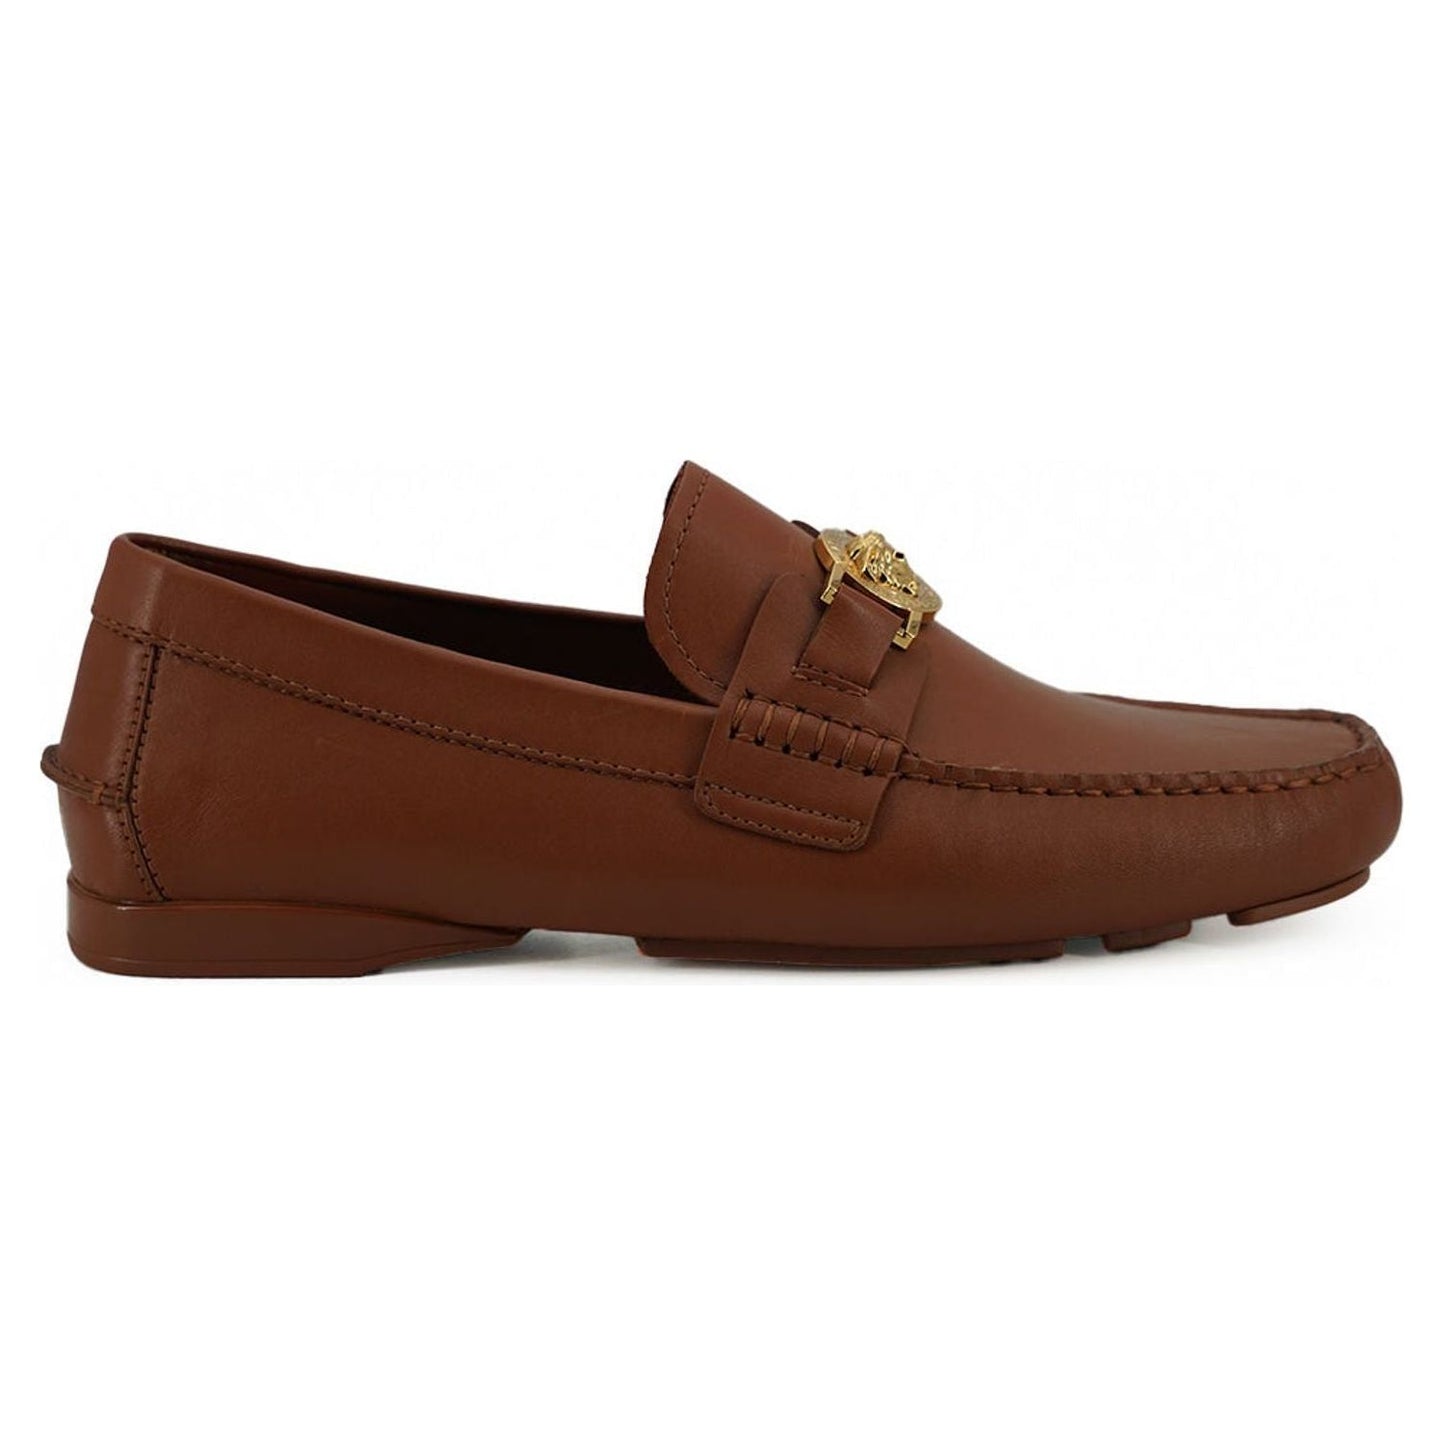 Versace Elegant Medusa-Embossed Leather Loafers natural-brown-calf-leather-loafers-shoes V70062-6-5f63d05a-999.jpg